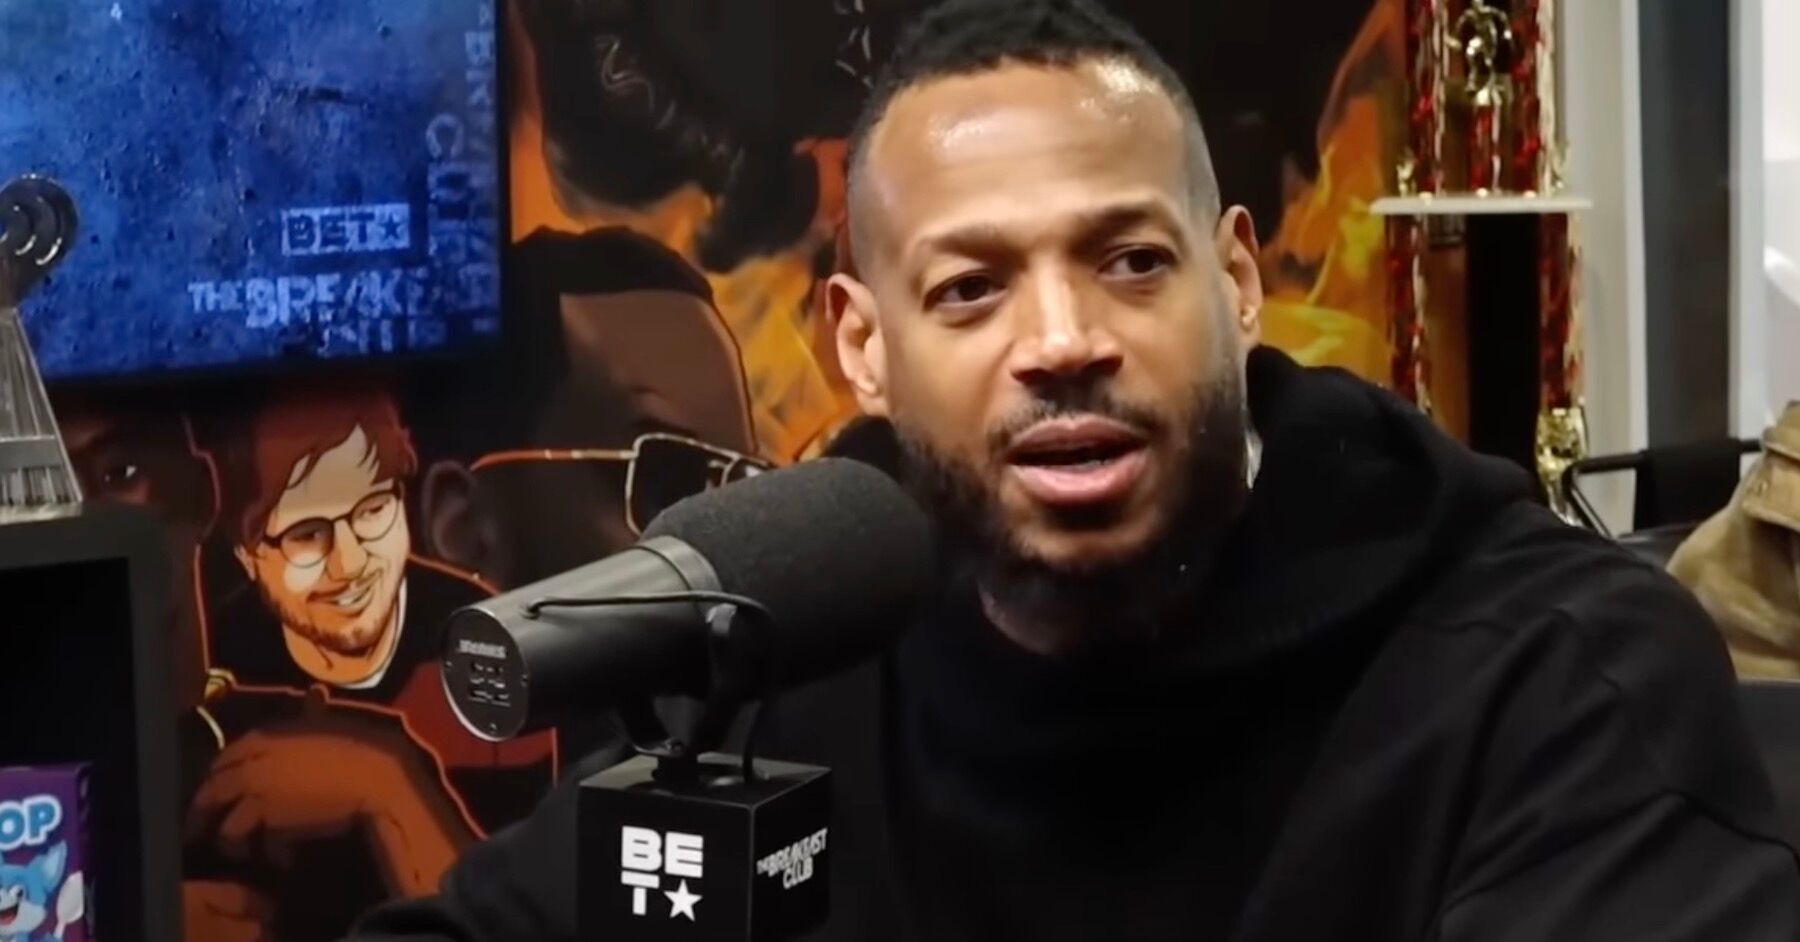 Marlon Wayans discusses his trans son on The Breakfast Club radio show